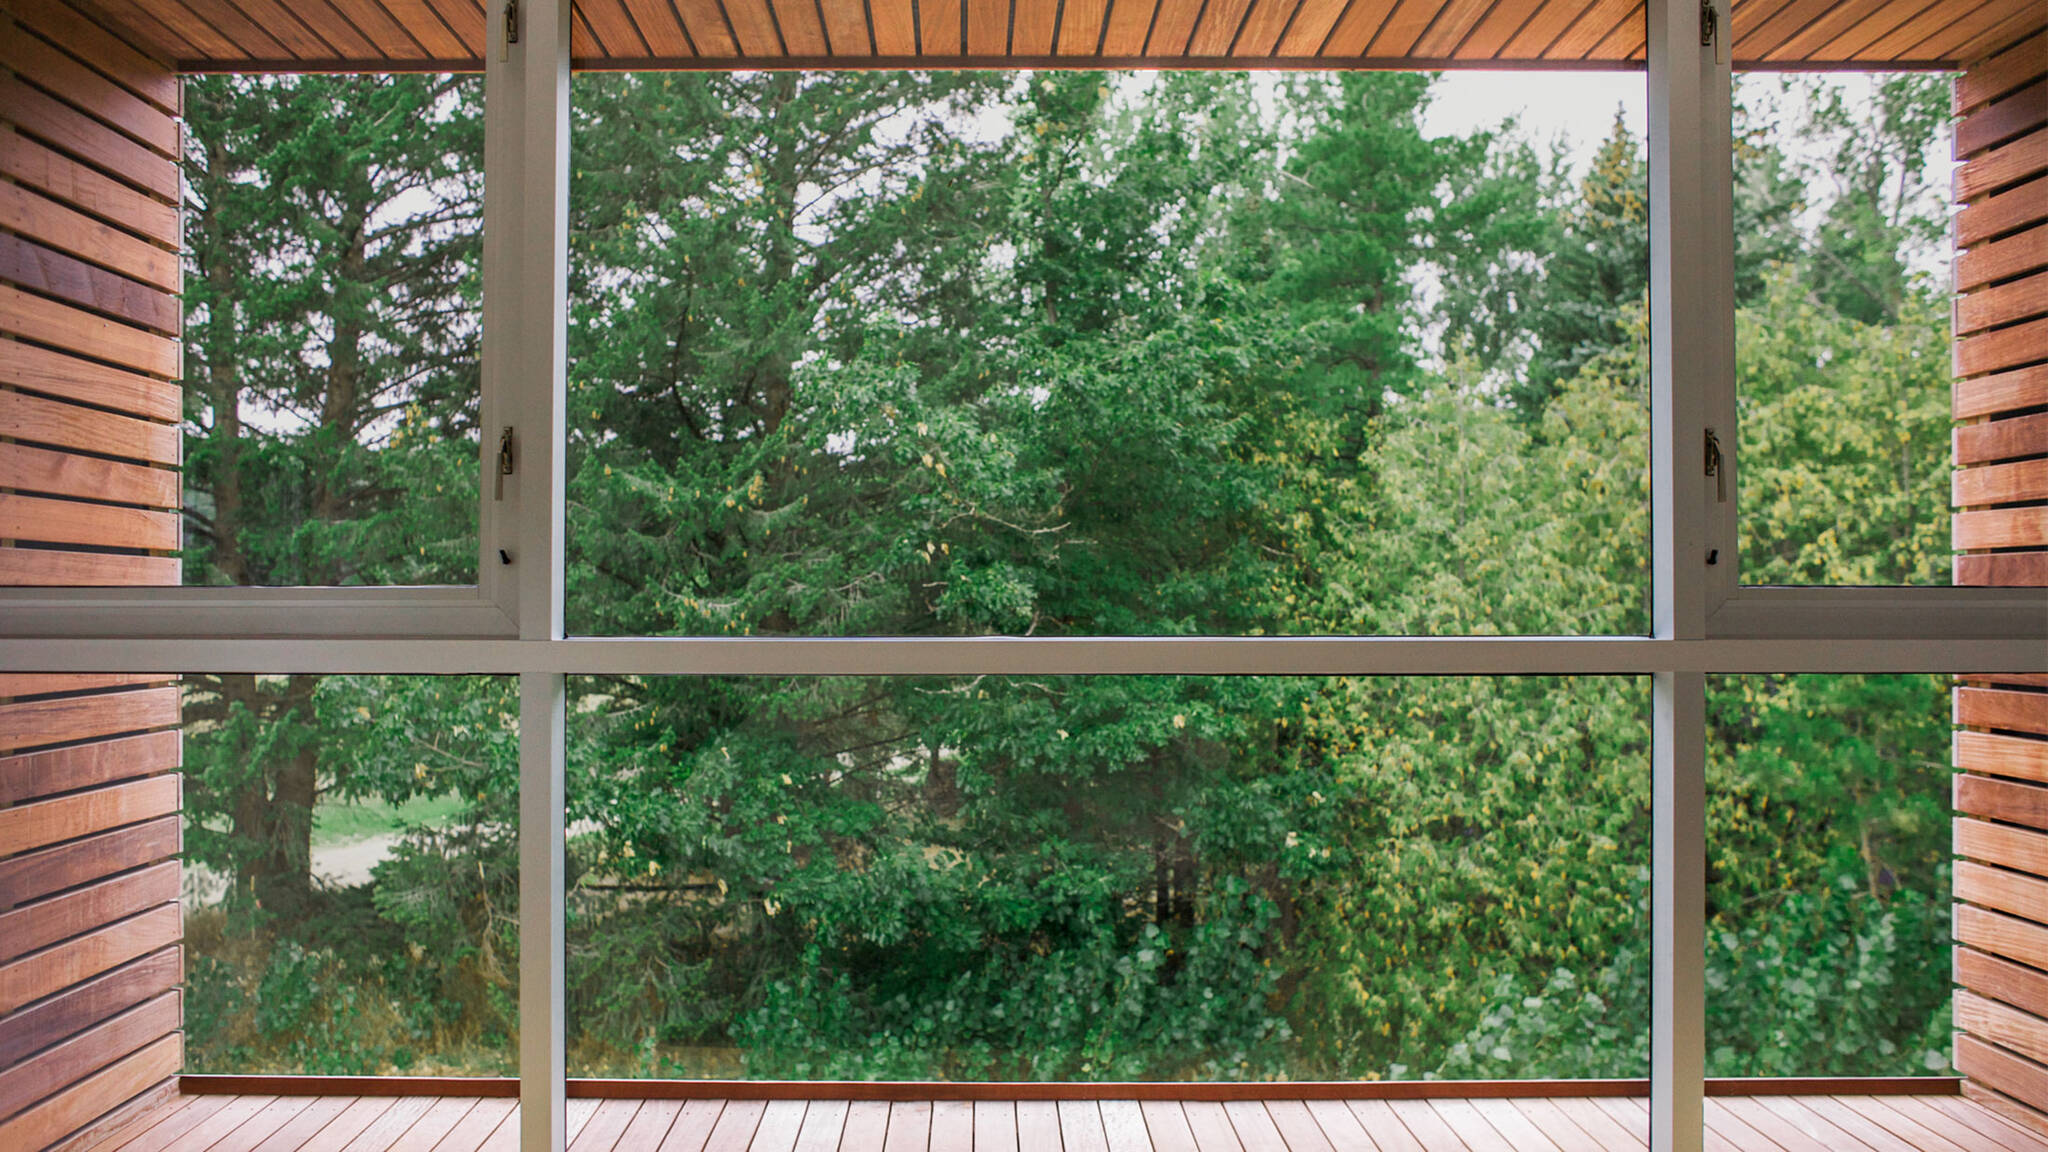 Framed window of the sustainable lake house project in Omena, Michigan designed by the architecture studio Danny Forster & Architecture